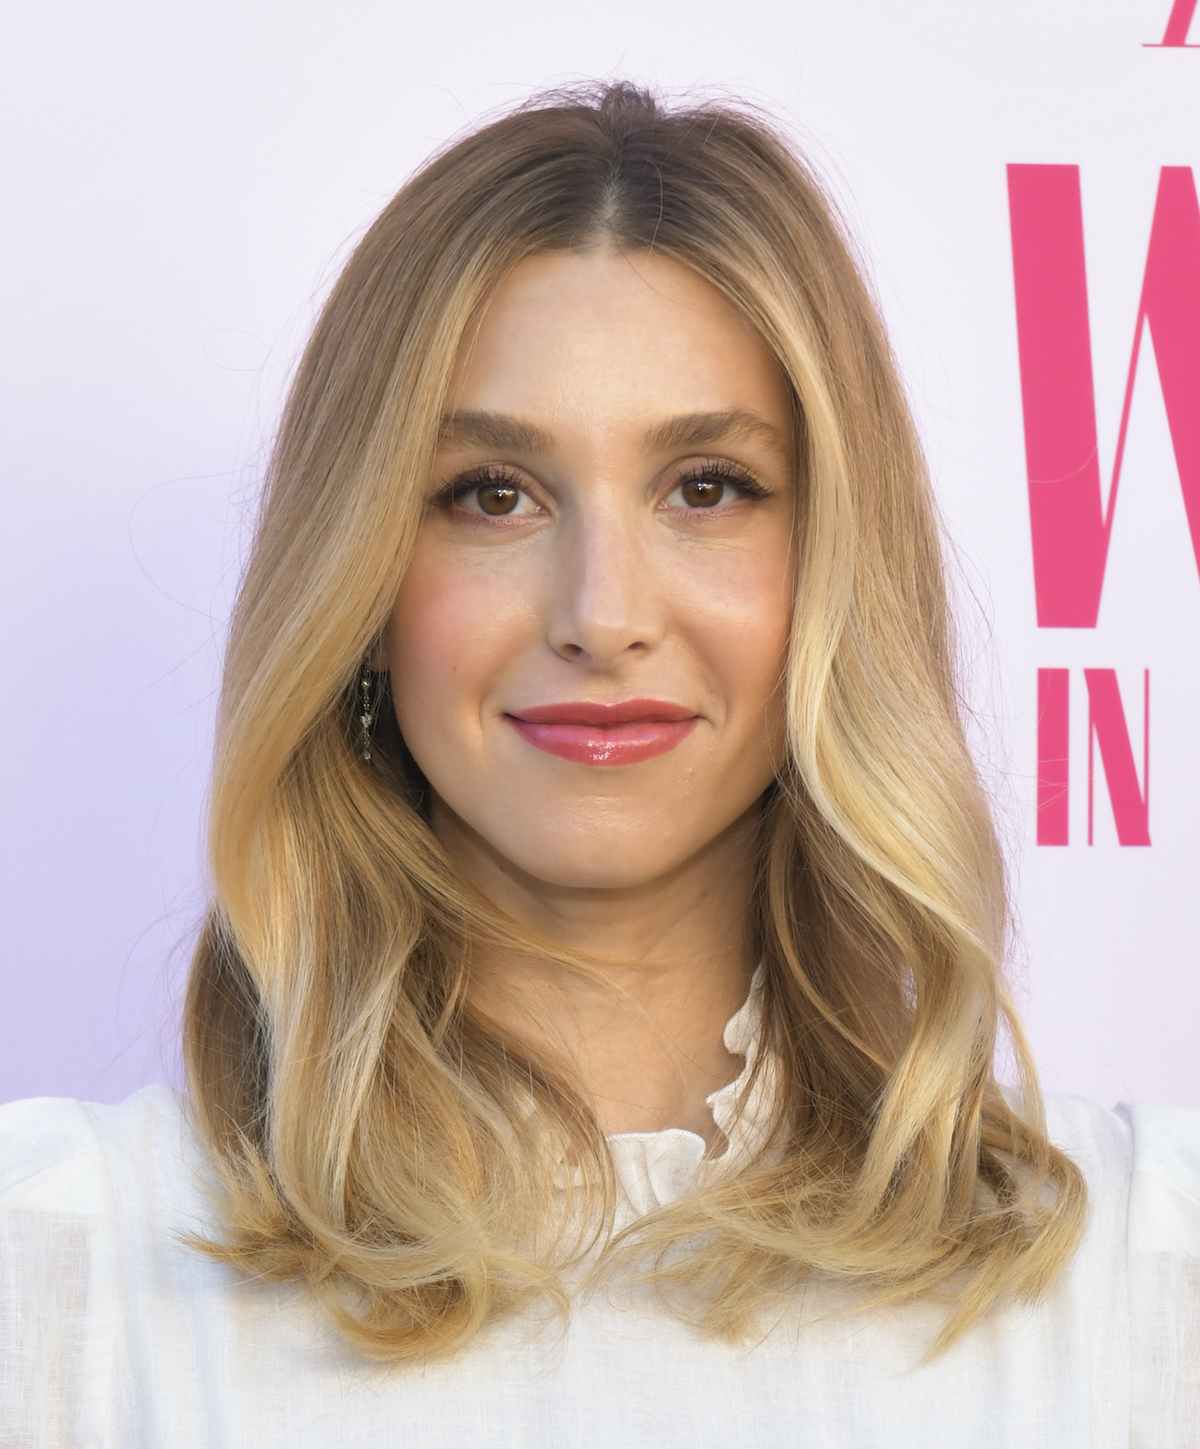 Whitney Port From ‘The Hills’ Understands Why Cameran Eubanks From ‘Southern Charm’ Walked Away From the Show (Exclusive)